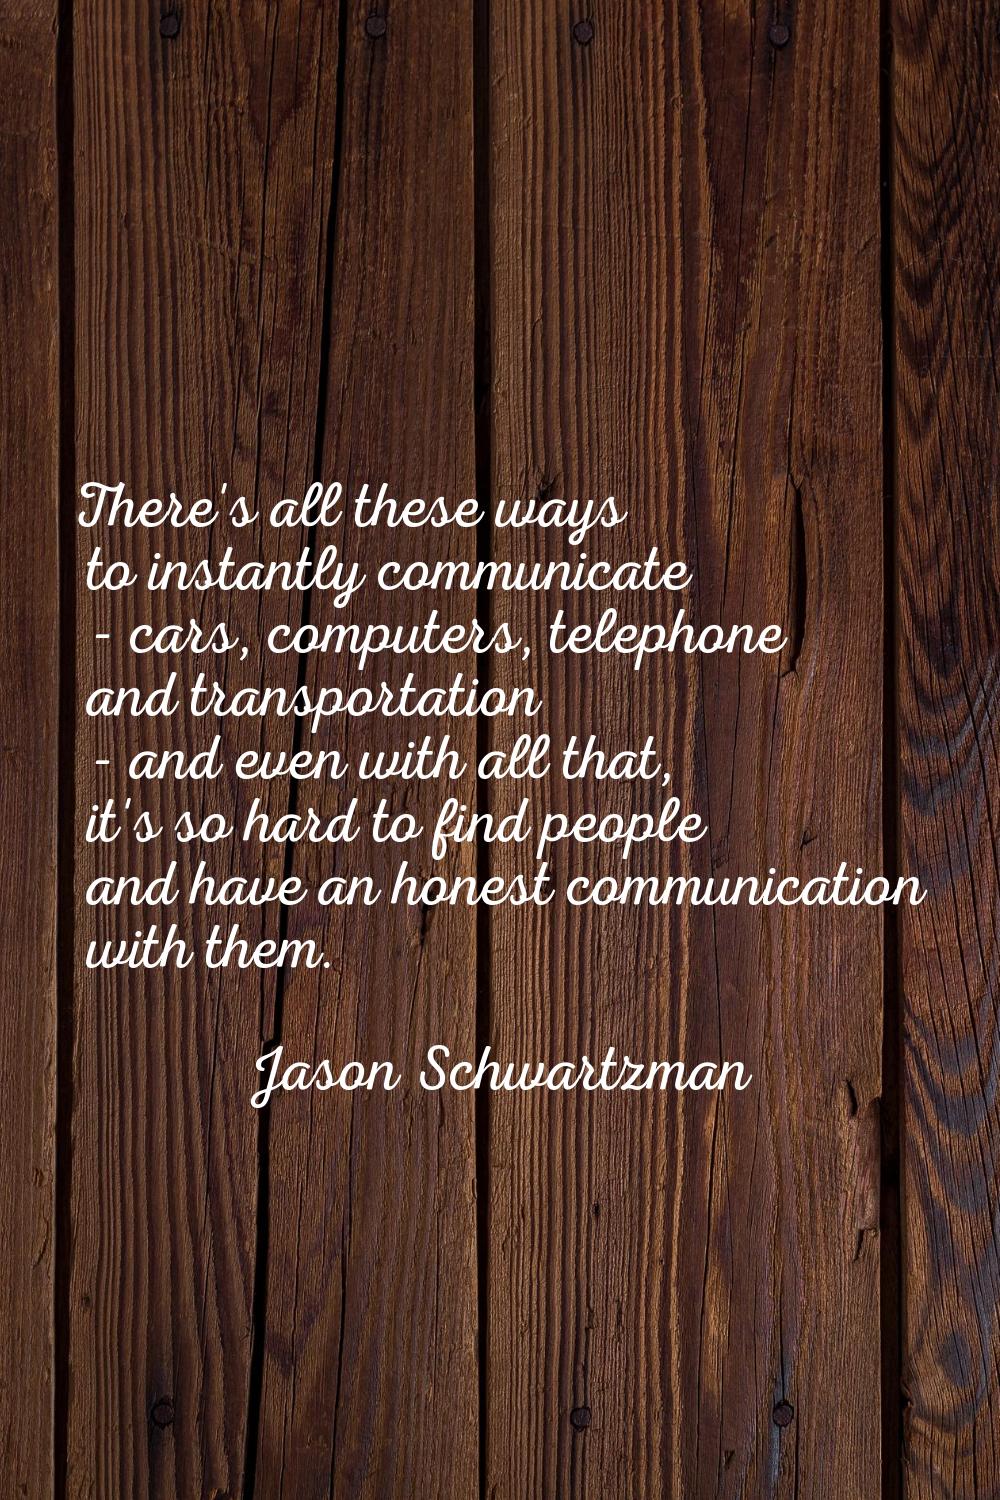 There's all these ways to instantly communicate - cars, computers, telephone and transportation - a